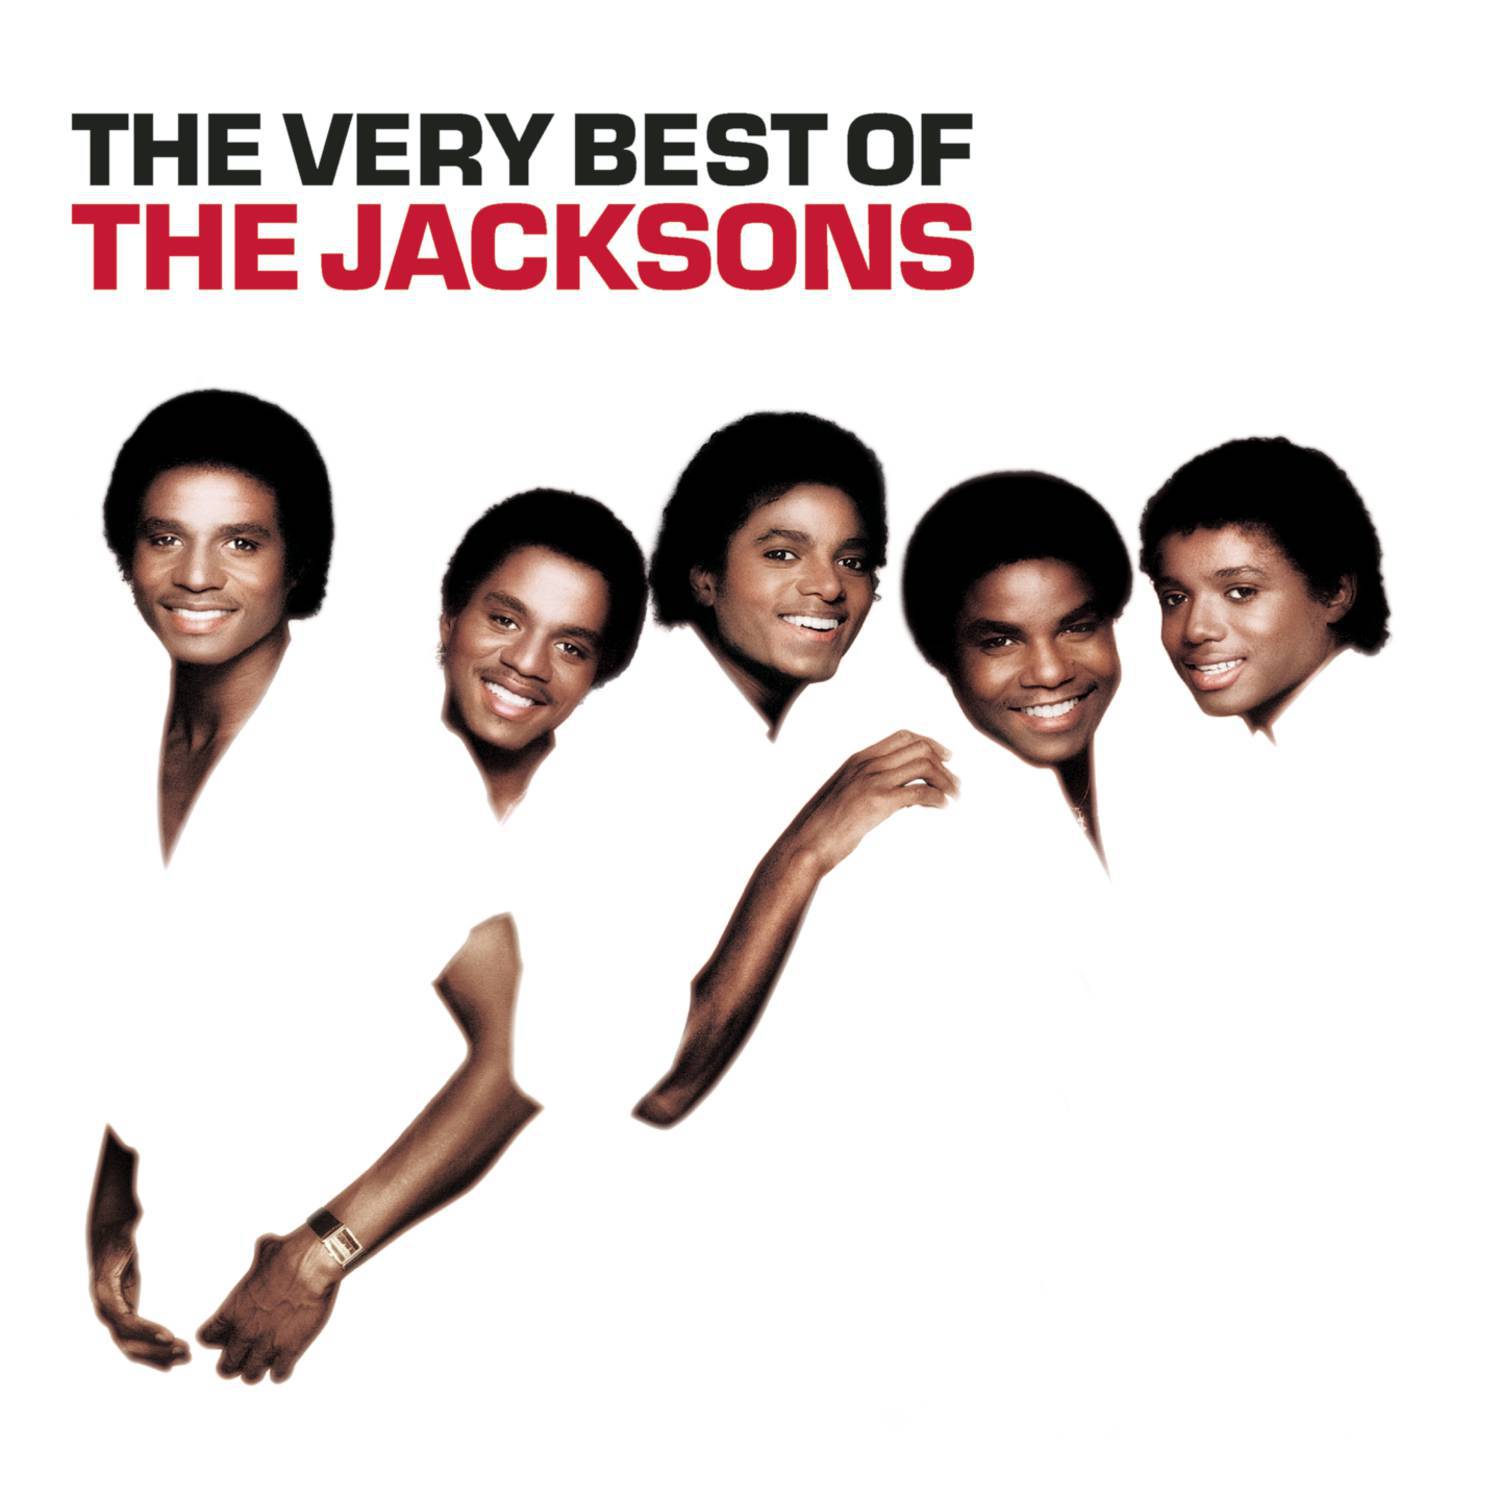 The Very Best Of The Jacksons and Jackson 5